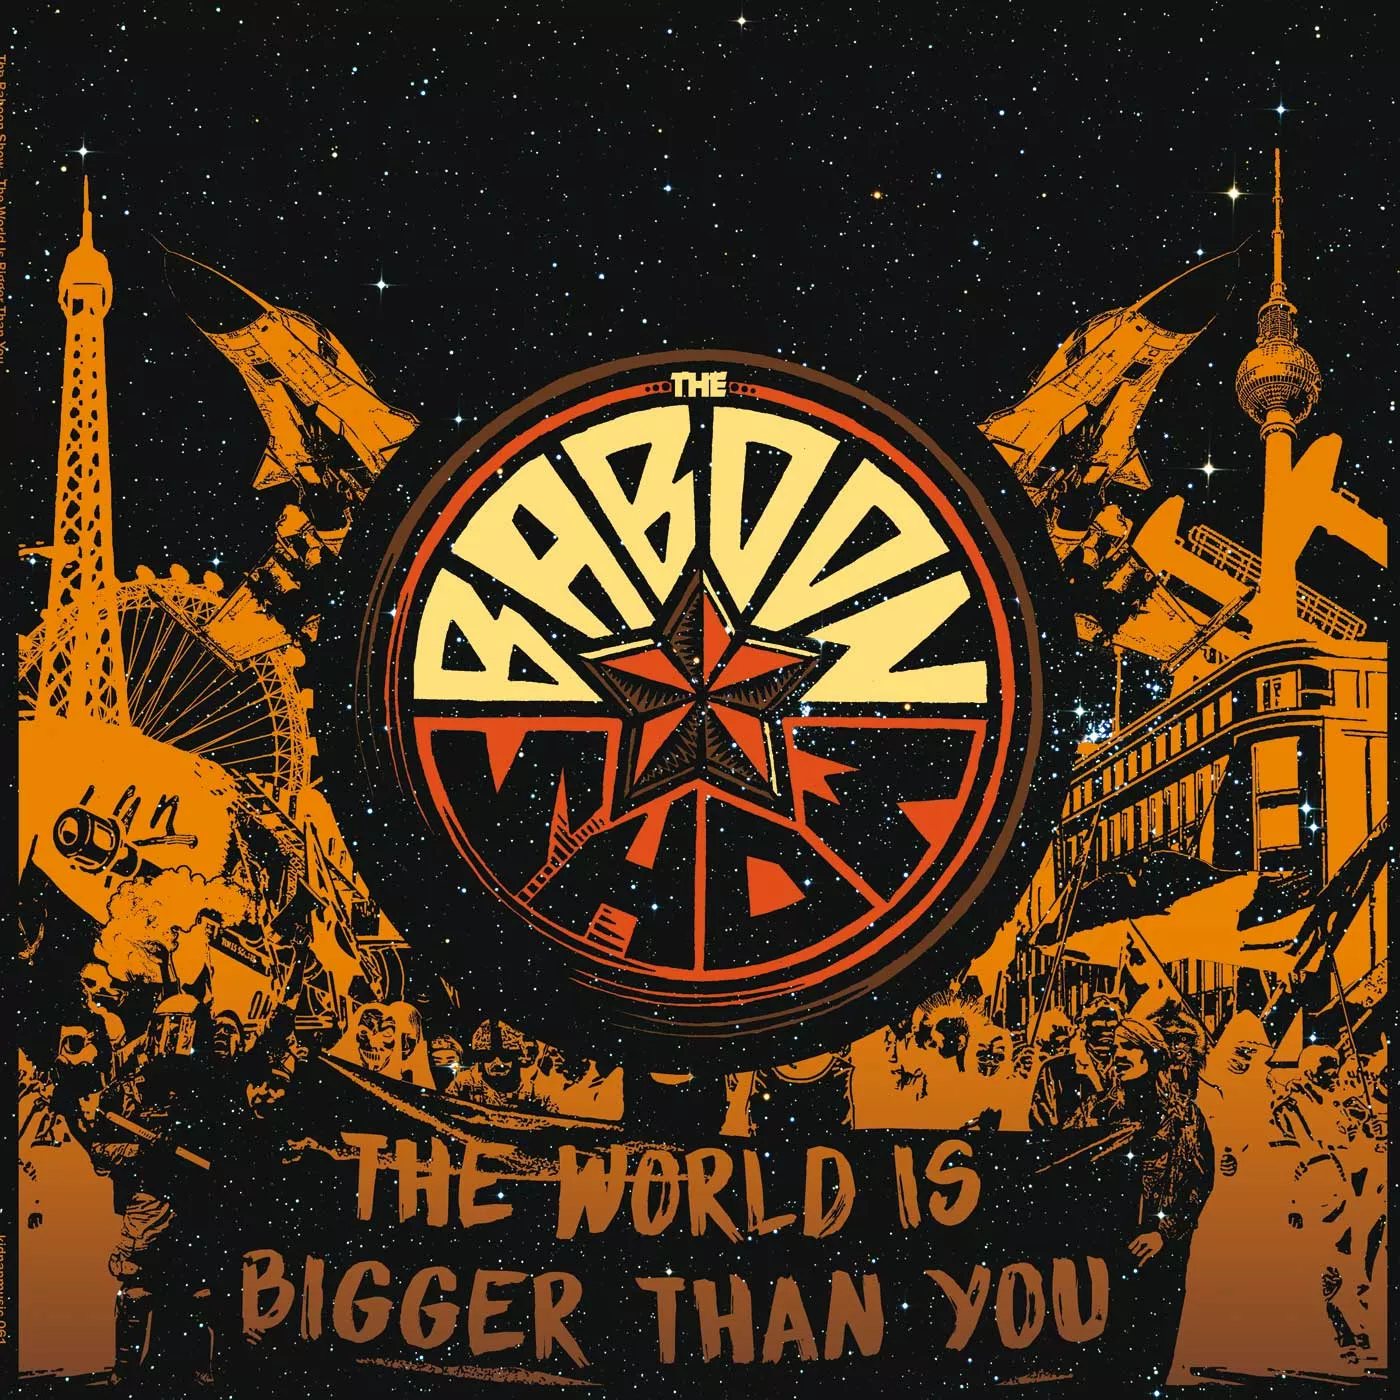 The World Is Bigger Than You - The Baboon Show